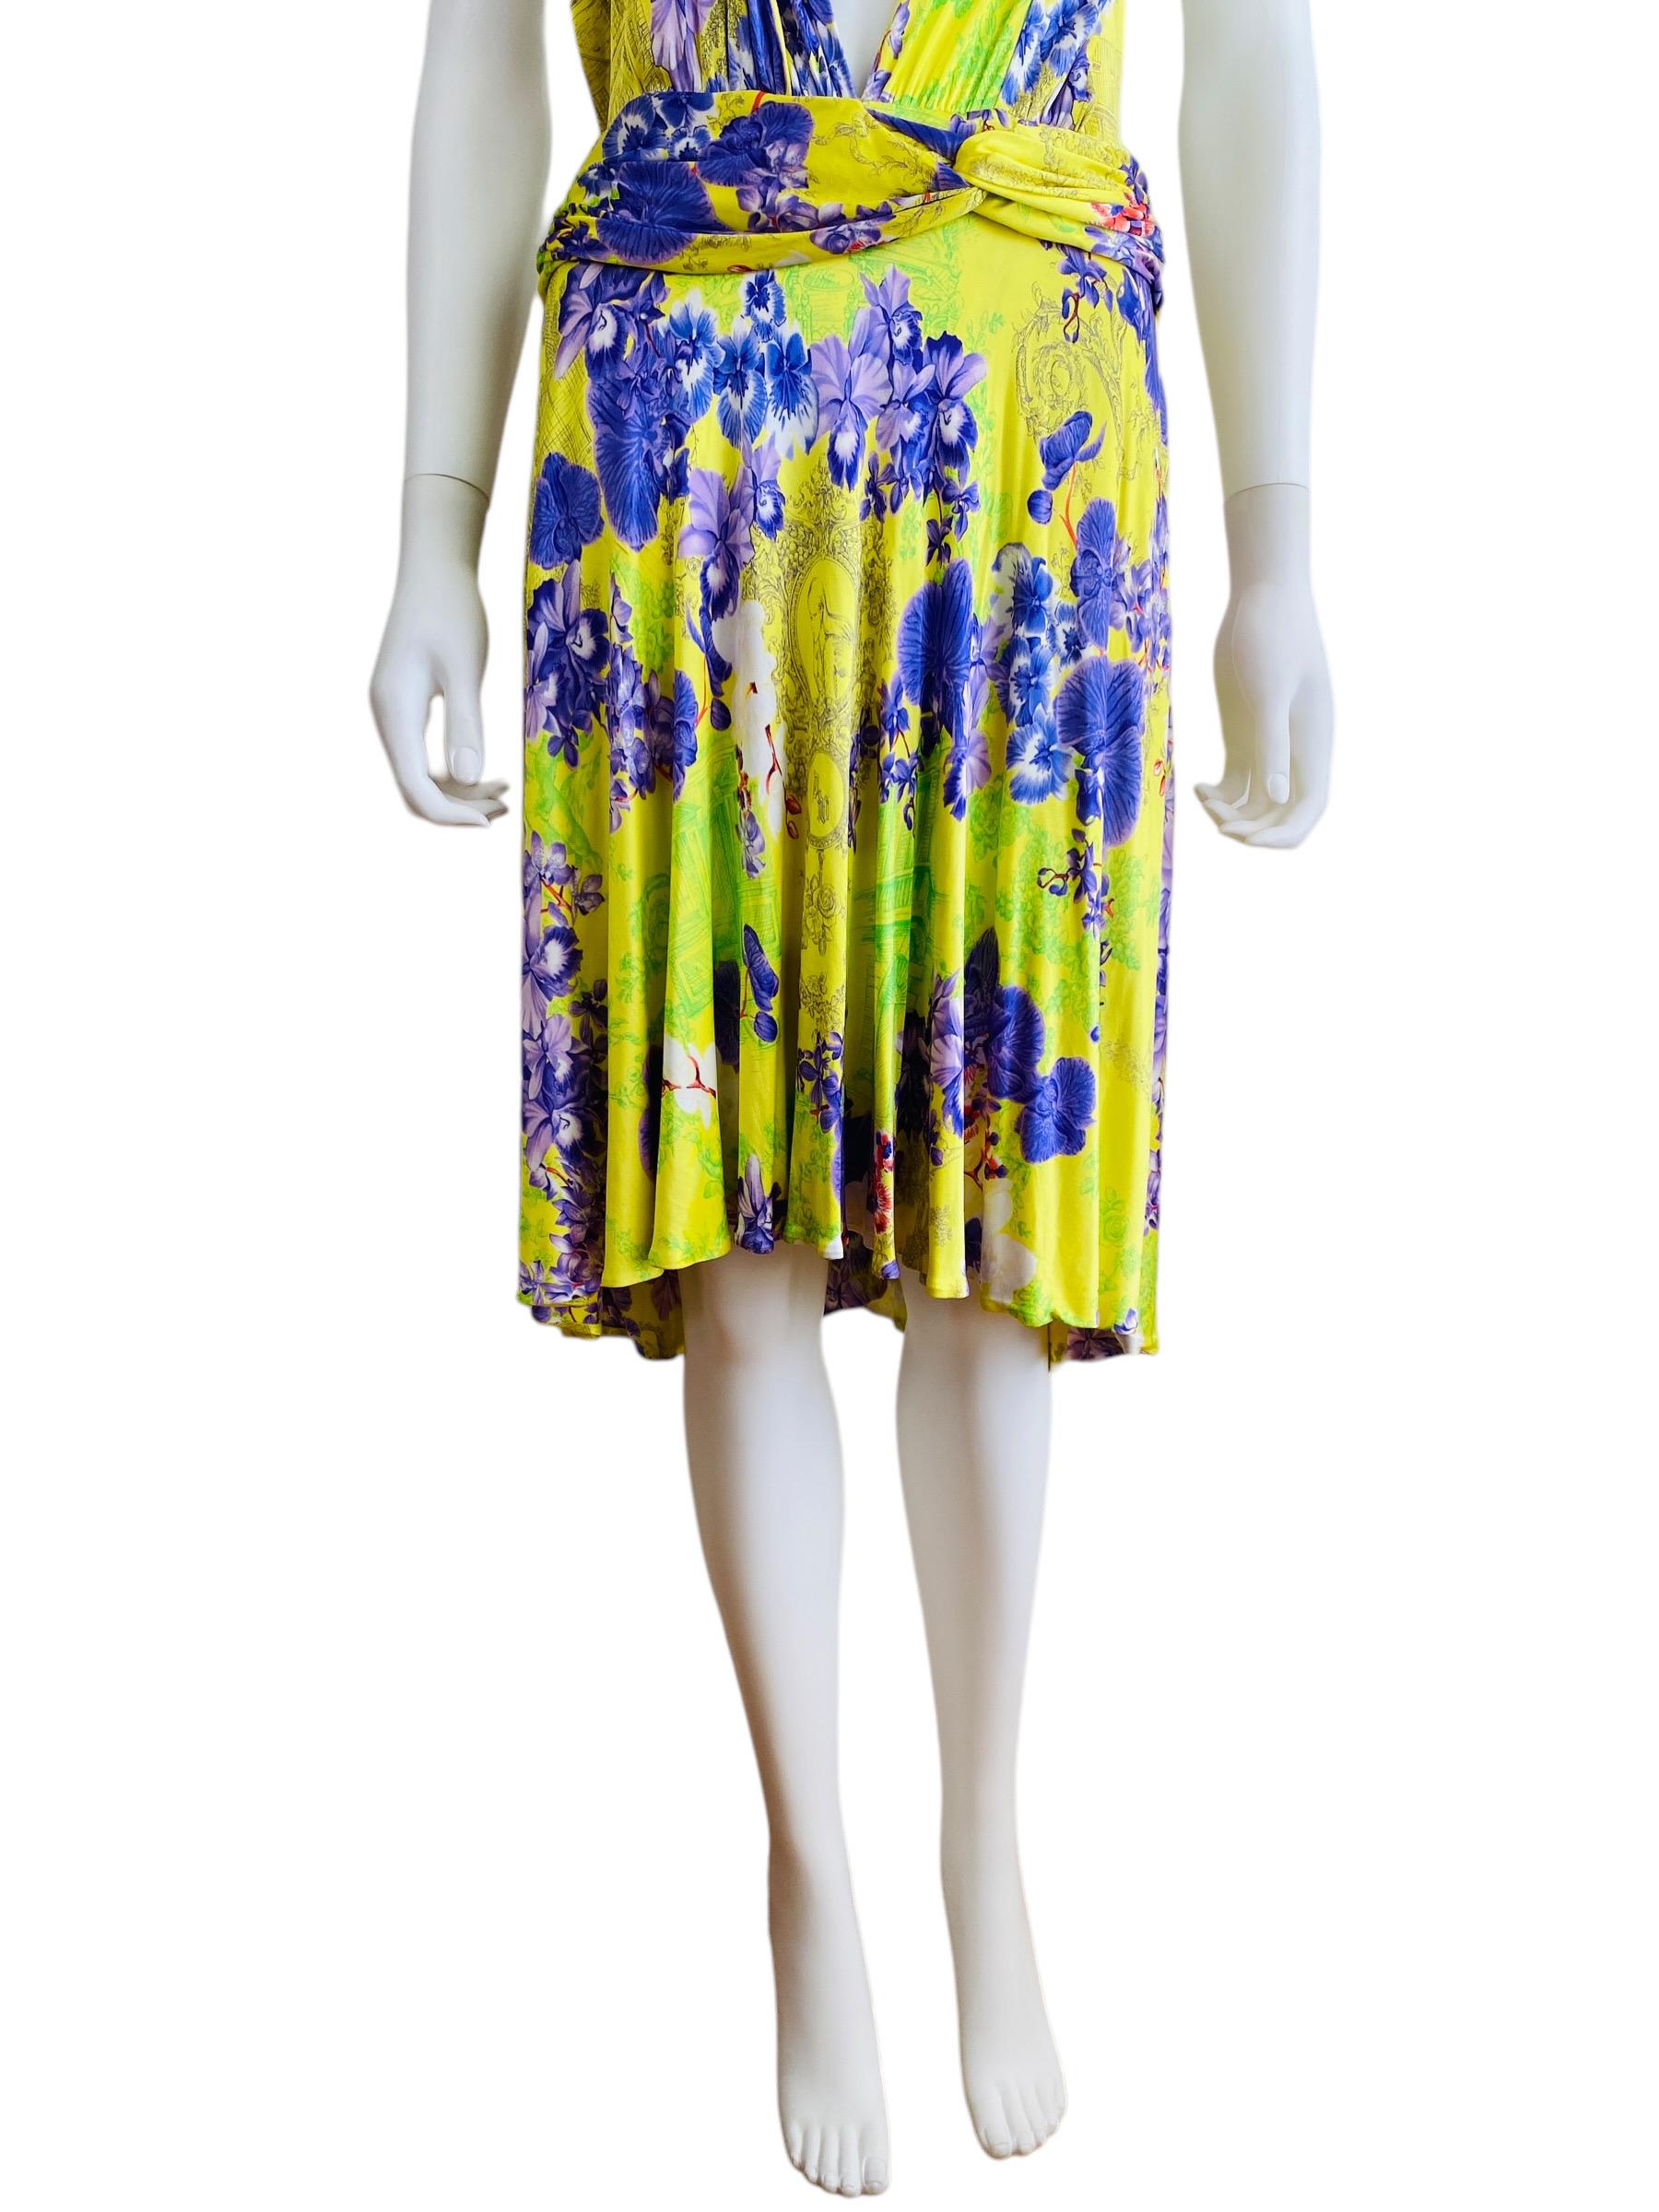 Vintage S/S 2004 Versace Dress Bright Yellow + Purple Orchid Floral Runway For Sale 4